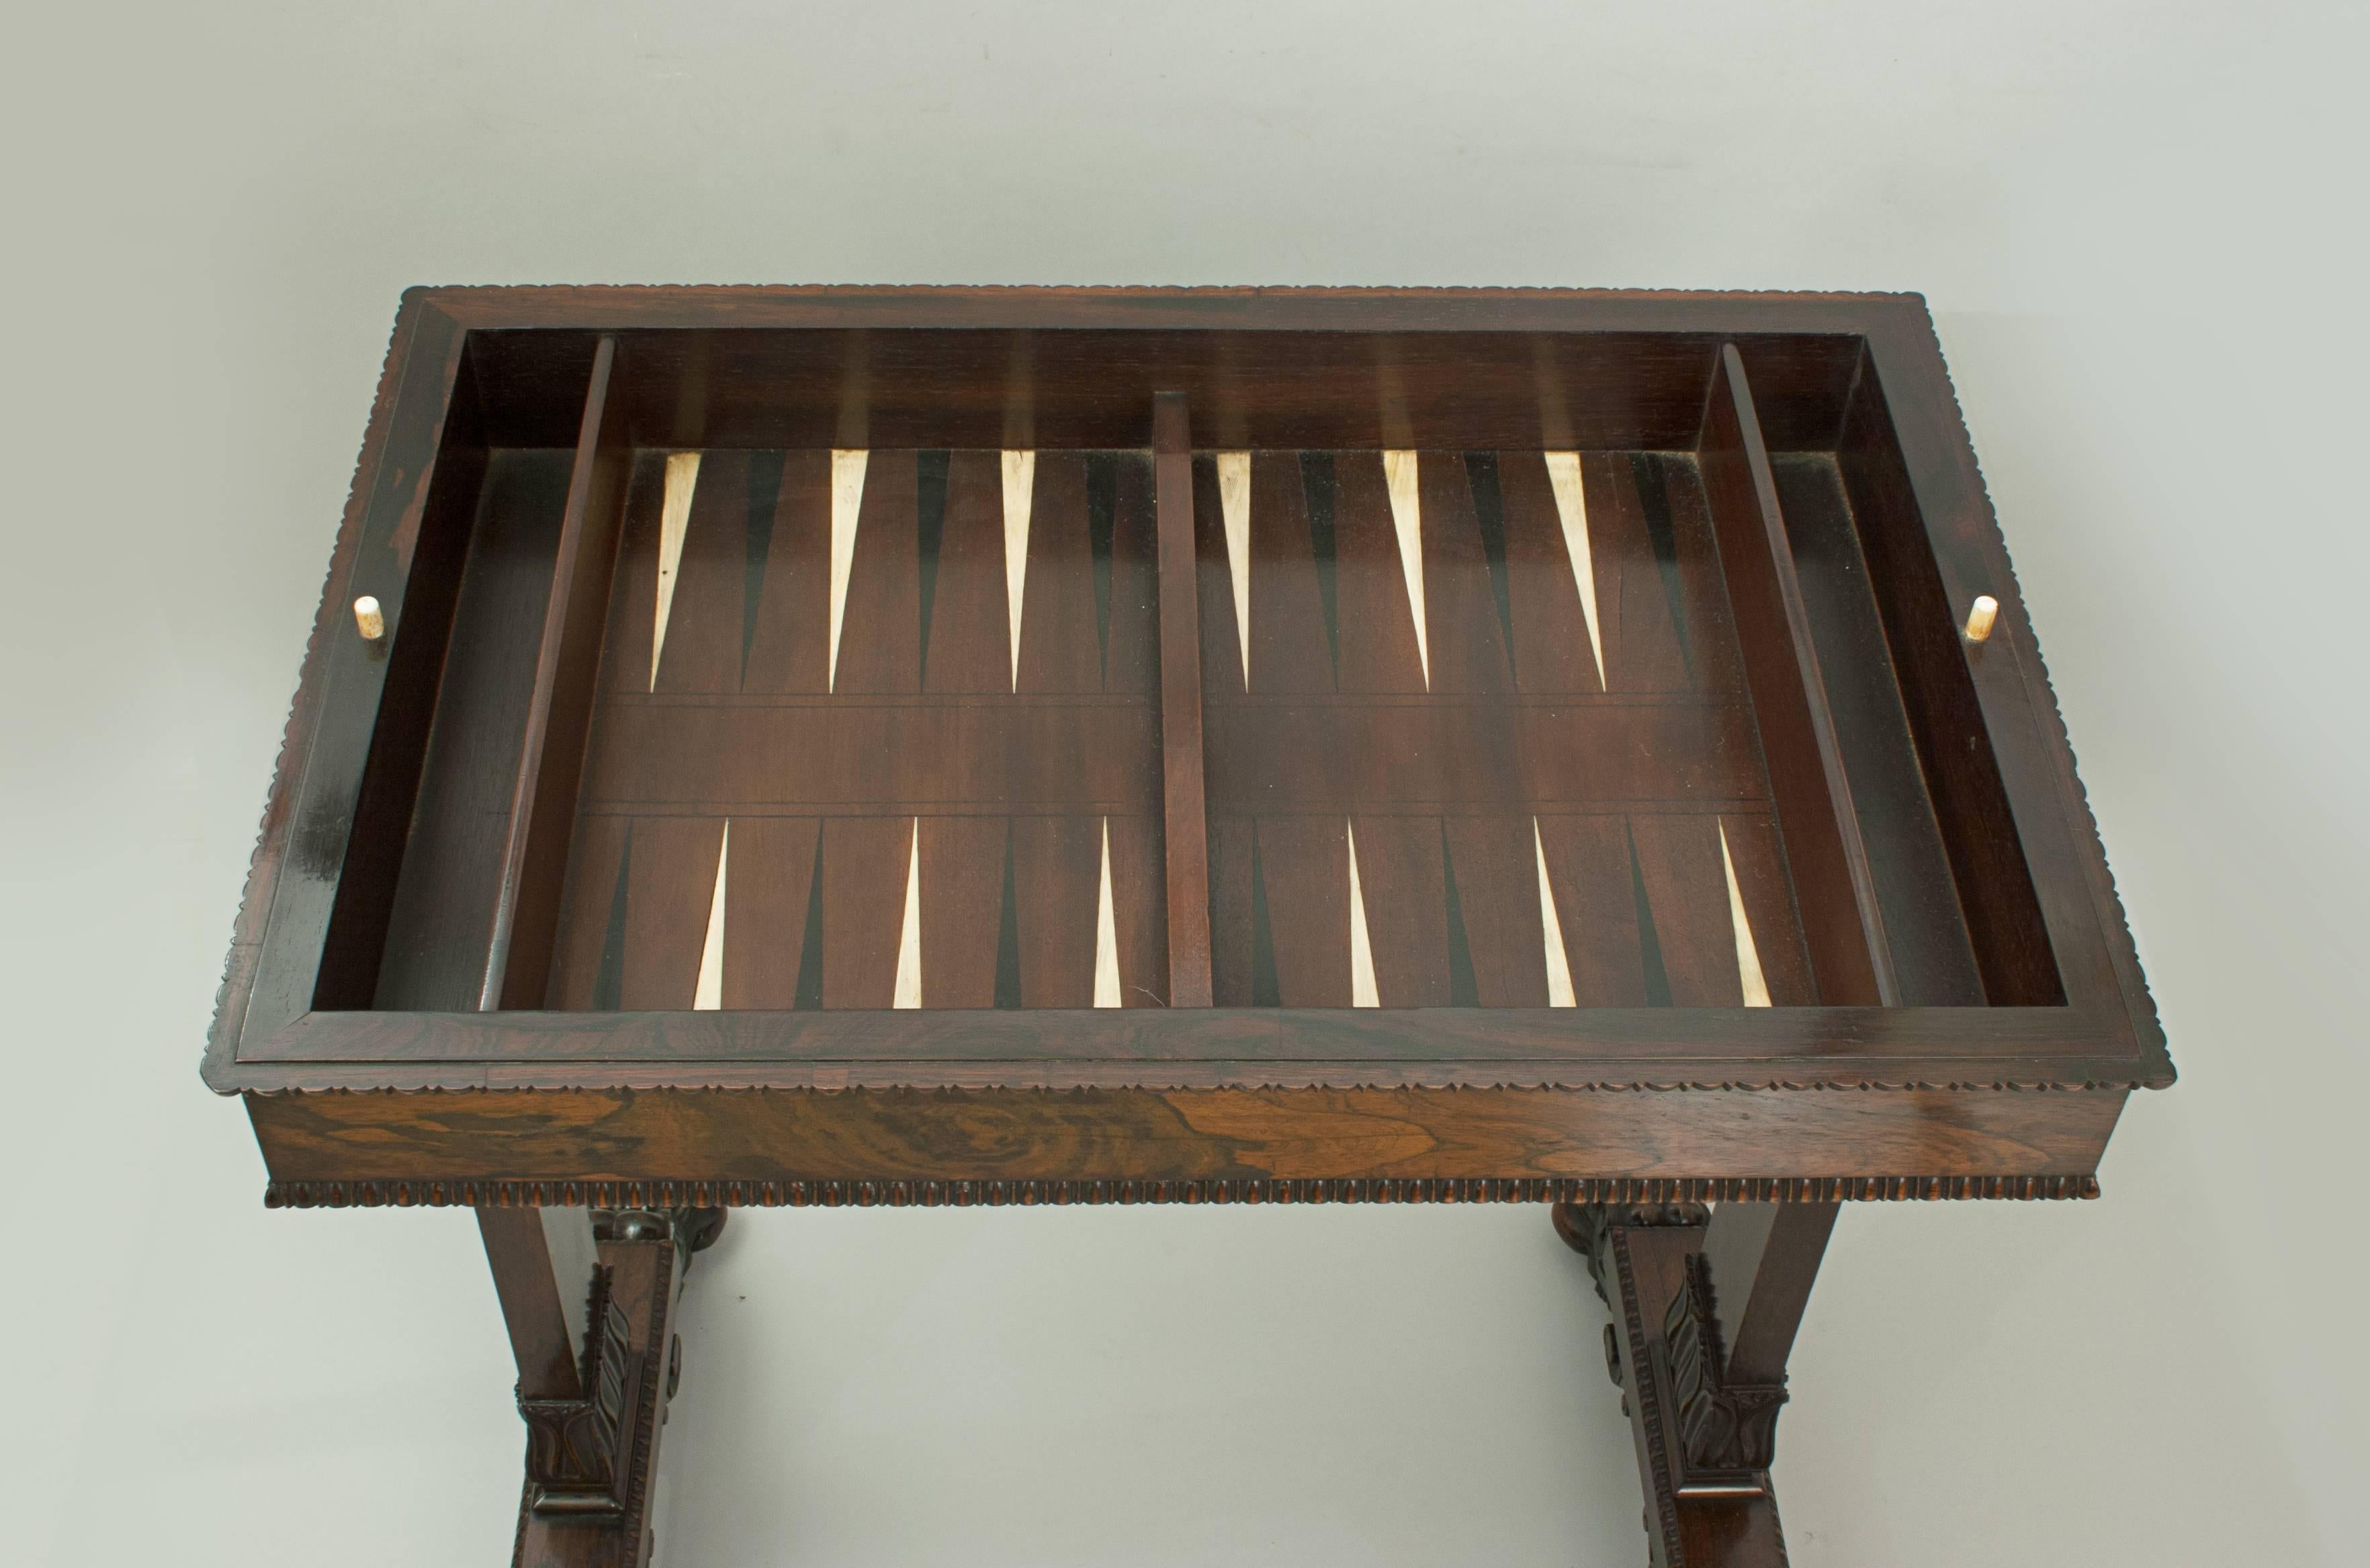 Early 19th Century Rosewood Games Table for Chess, Droughts and Backgammon